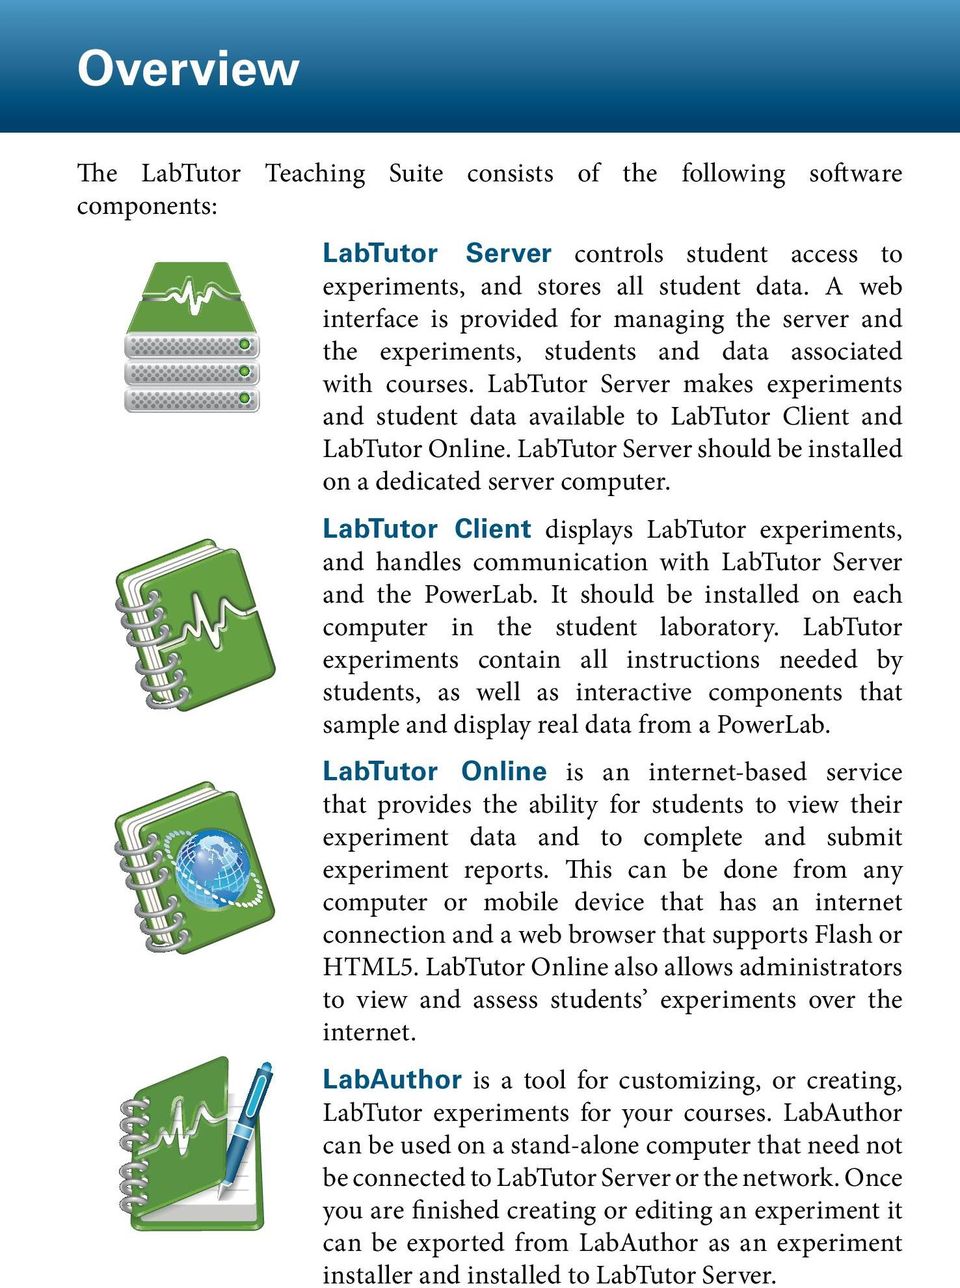 LabTutor Server makes experiments and student data available to LabTutor Client and LabTutor Online. LabTutor Server should be installed on a dedicated server computer.